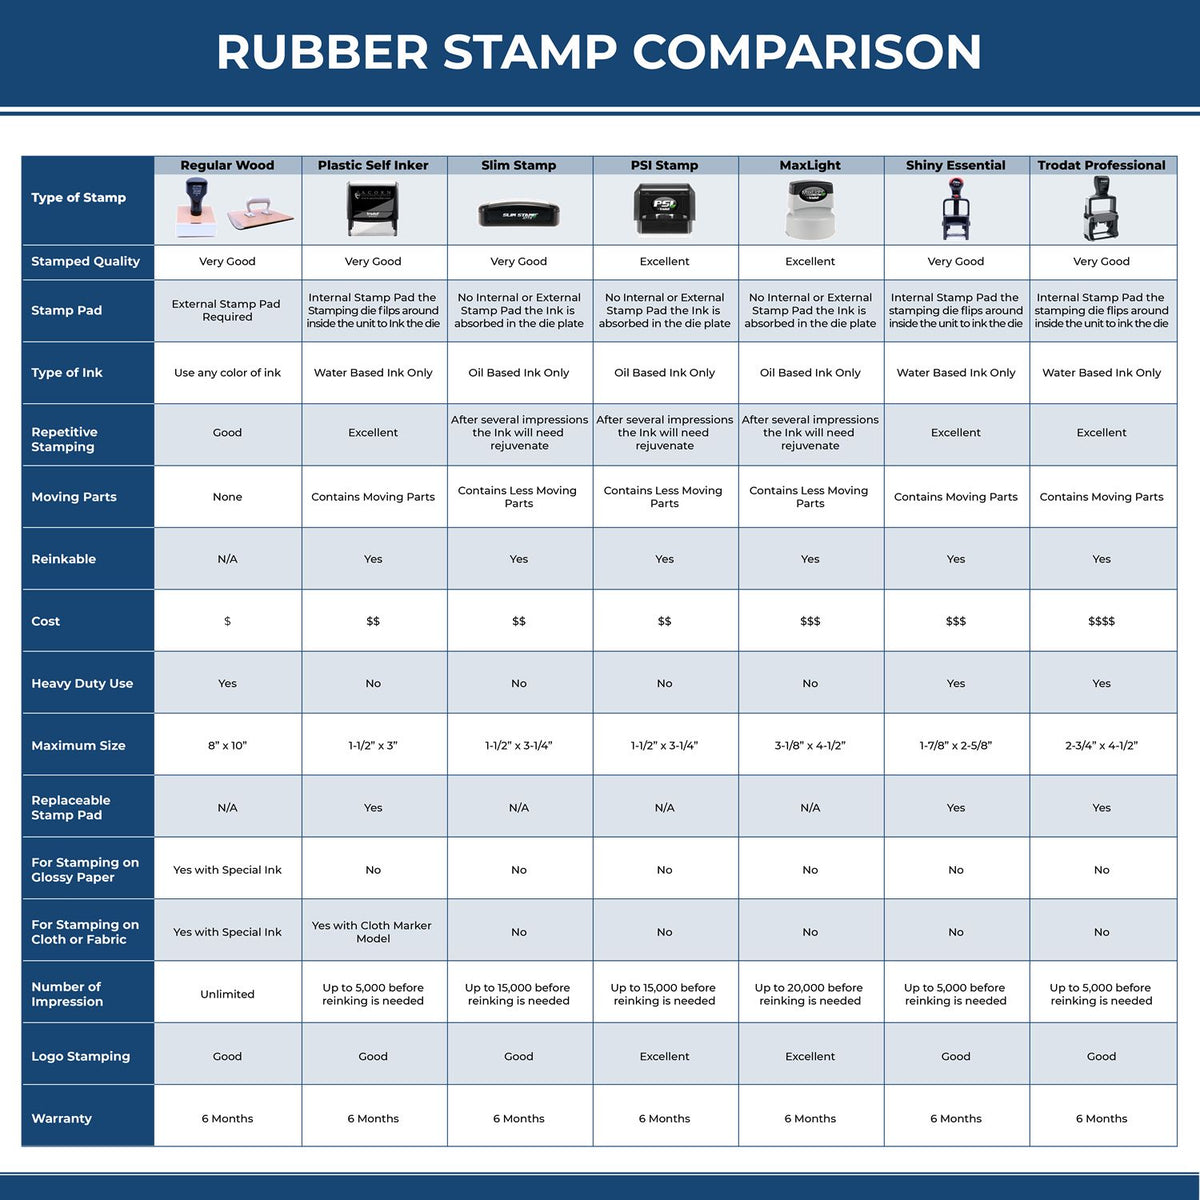 Large Self-Inking Acreditado Stamp 5555S Rubber Stamp Comparison